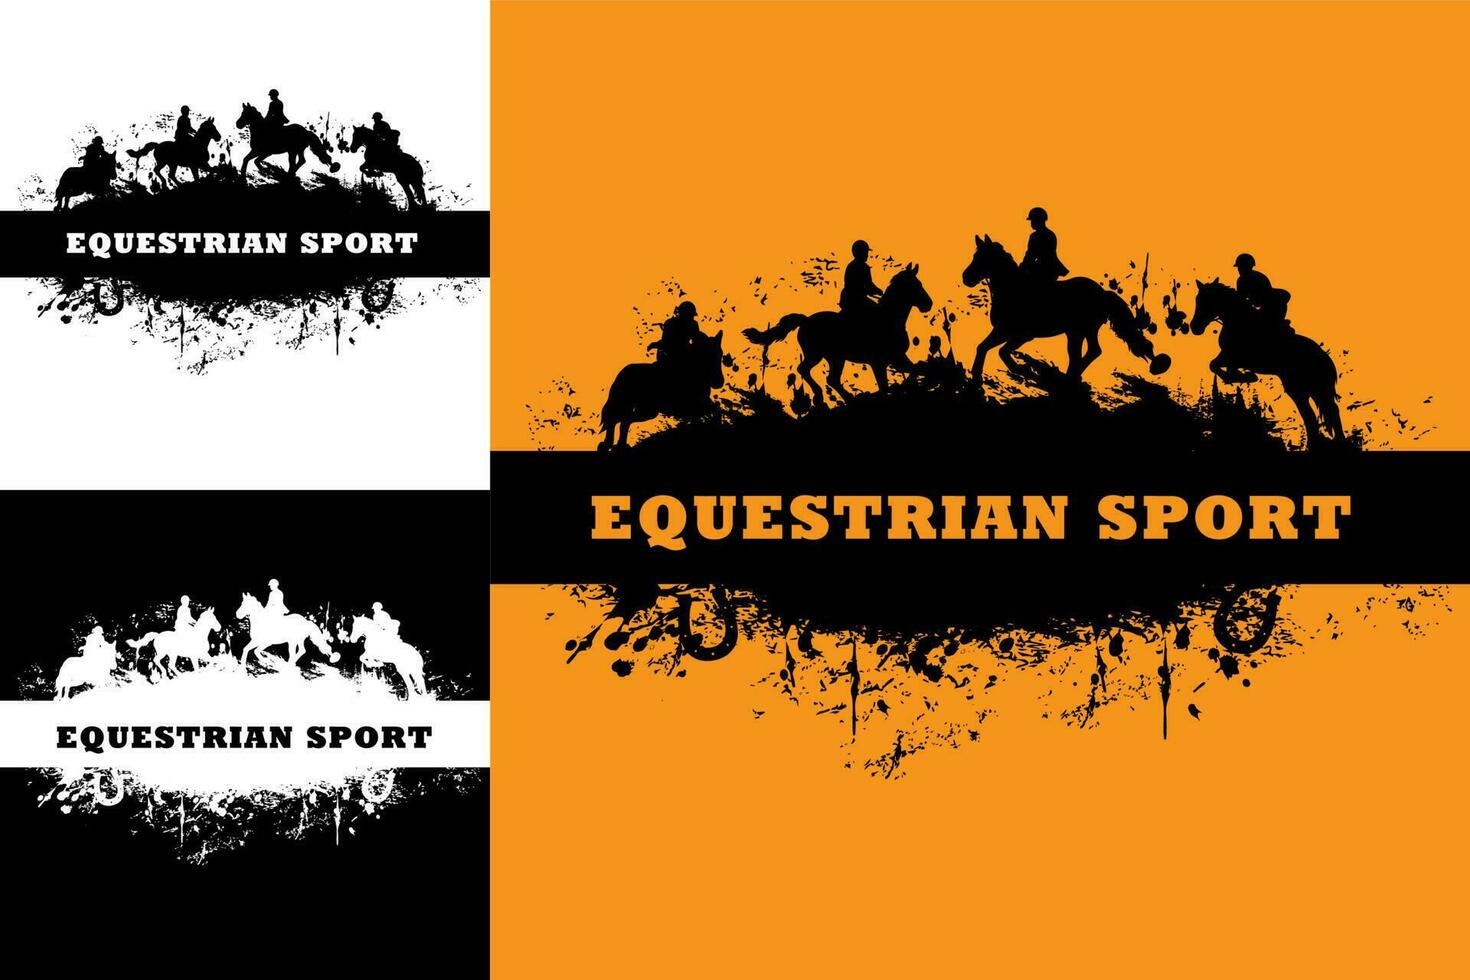 Horse racing and riding, equestrian sport banners vector